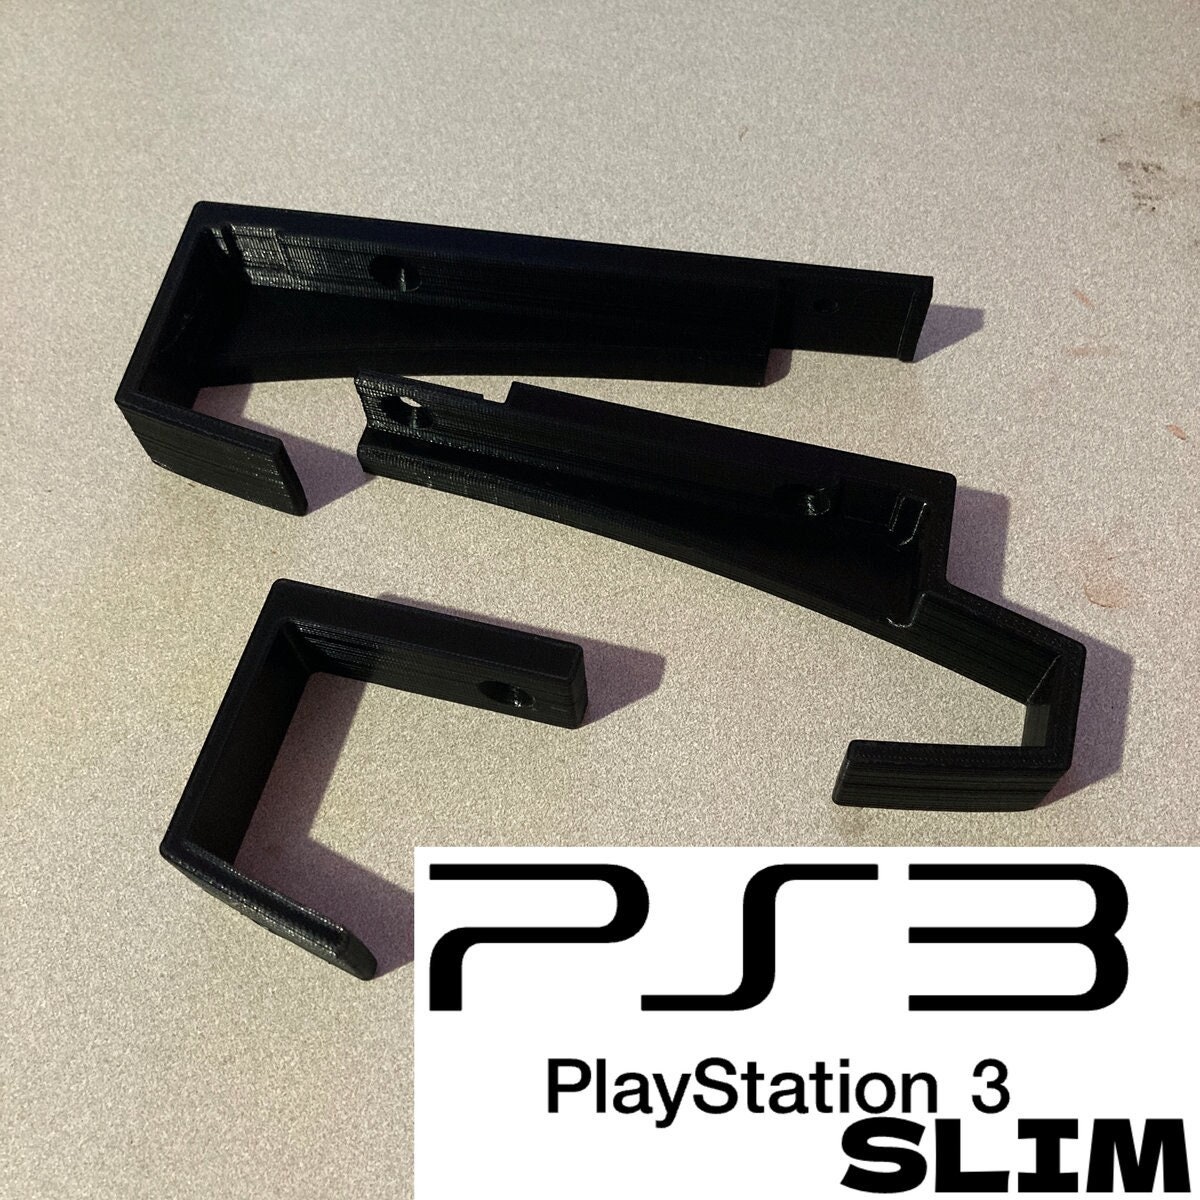 PSX-Place on X: No need for INCOMPLETE version's of the PS3